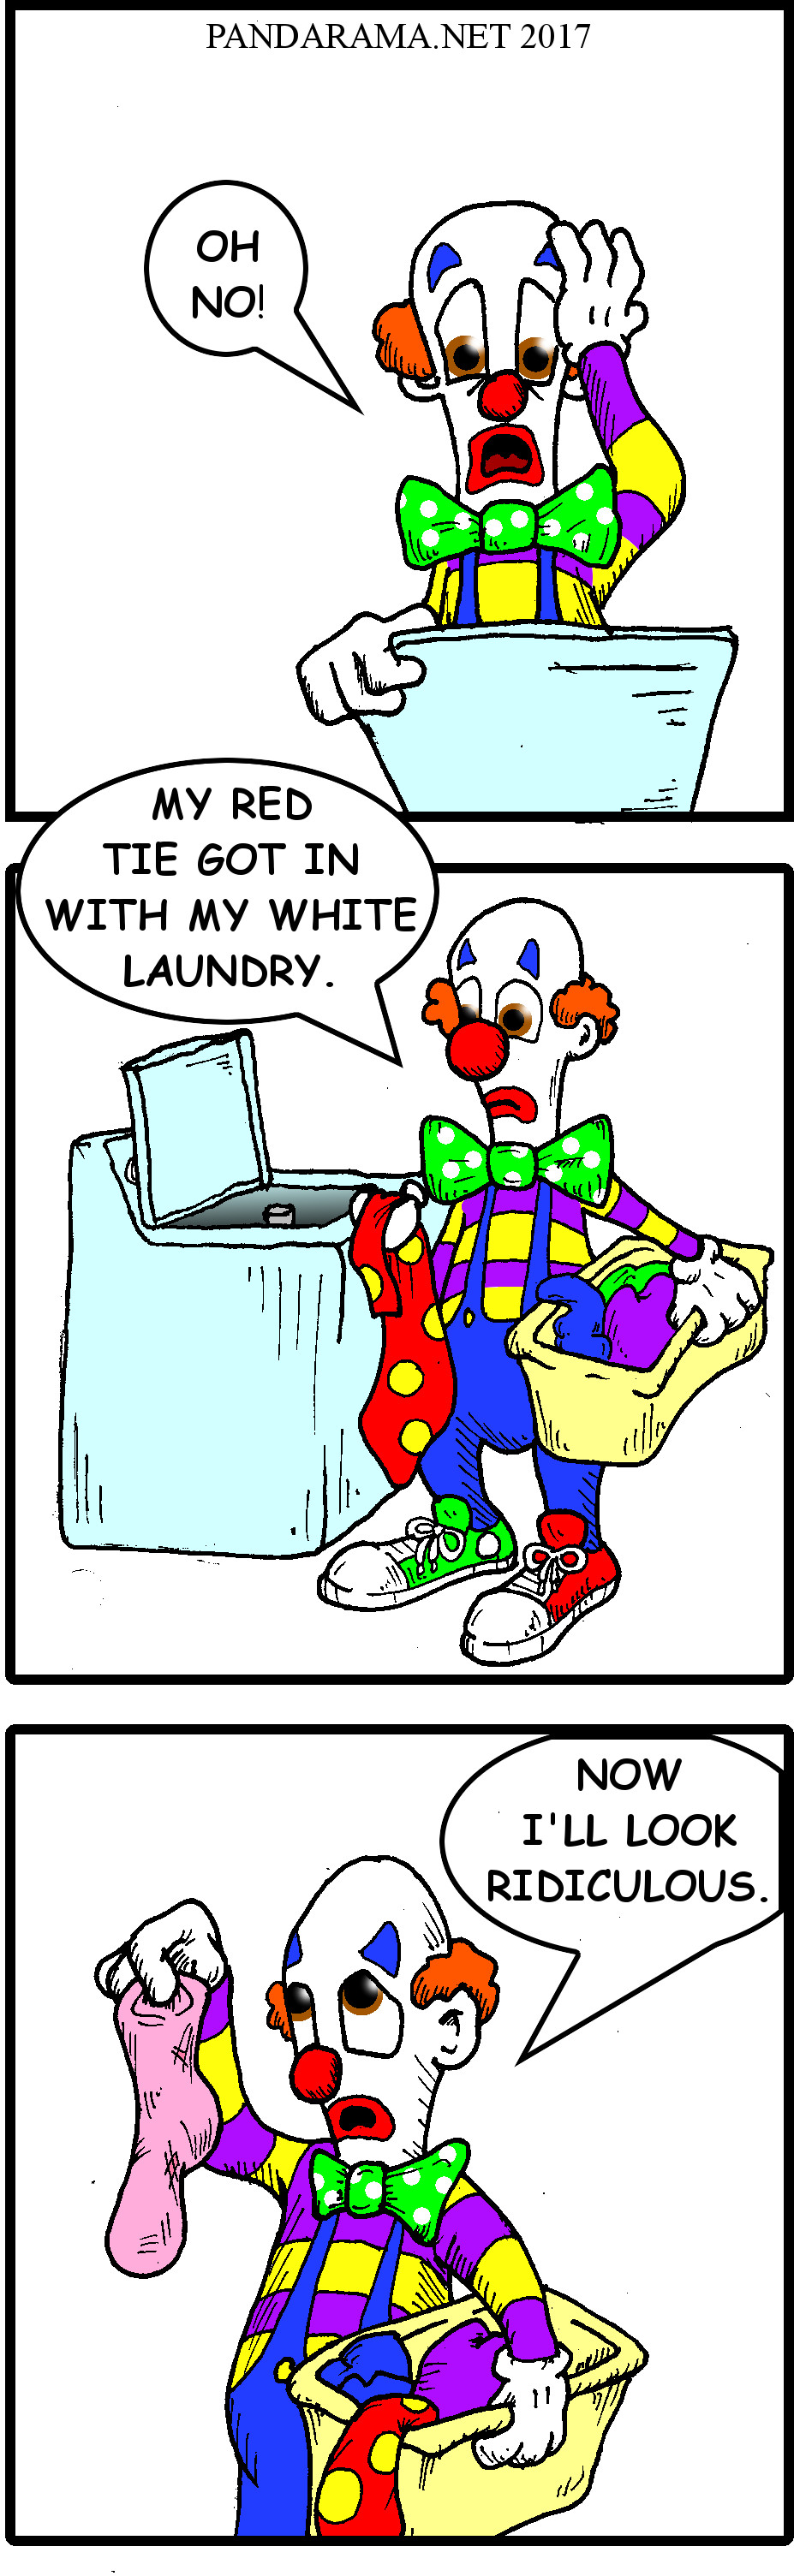 comicstrip of clown accidentally turning his white laundry pink and being upset that he will NOW look ridiculous. reds with whites. pink laundry. cherry blossom. pandarama.